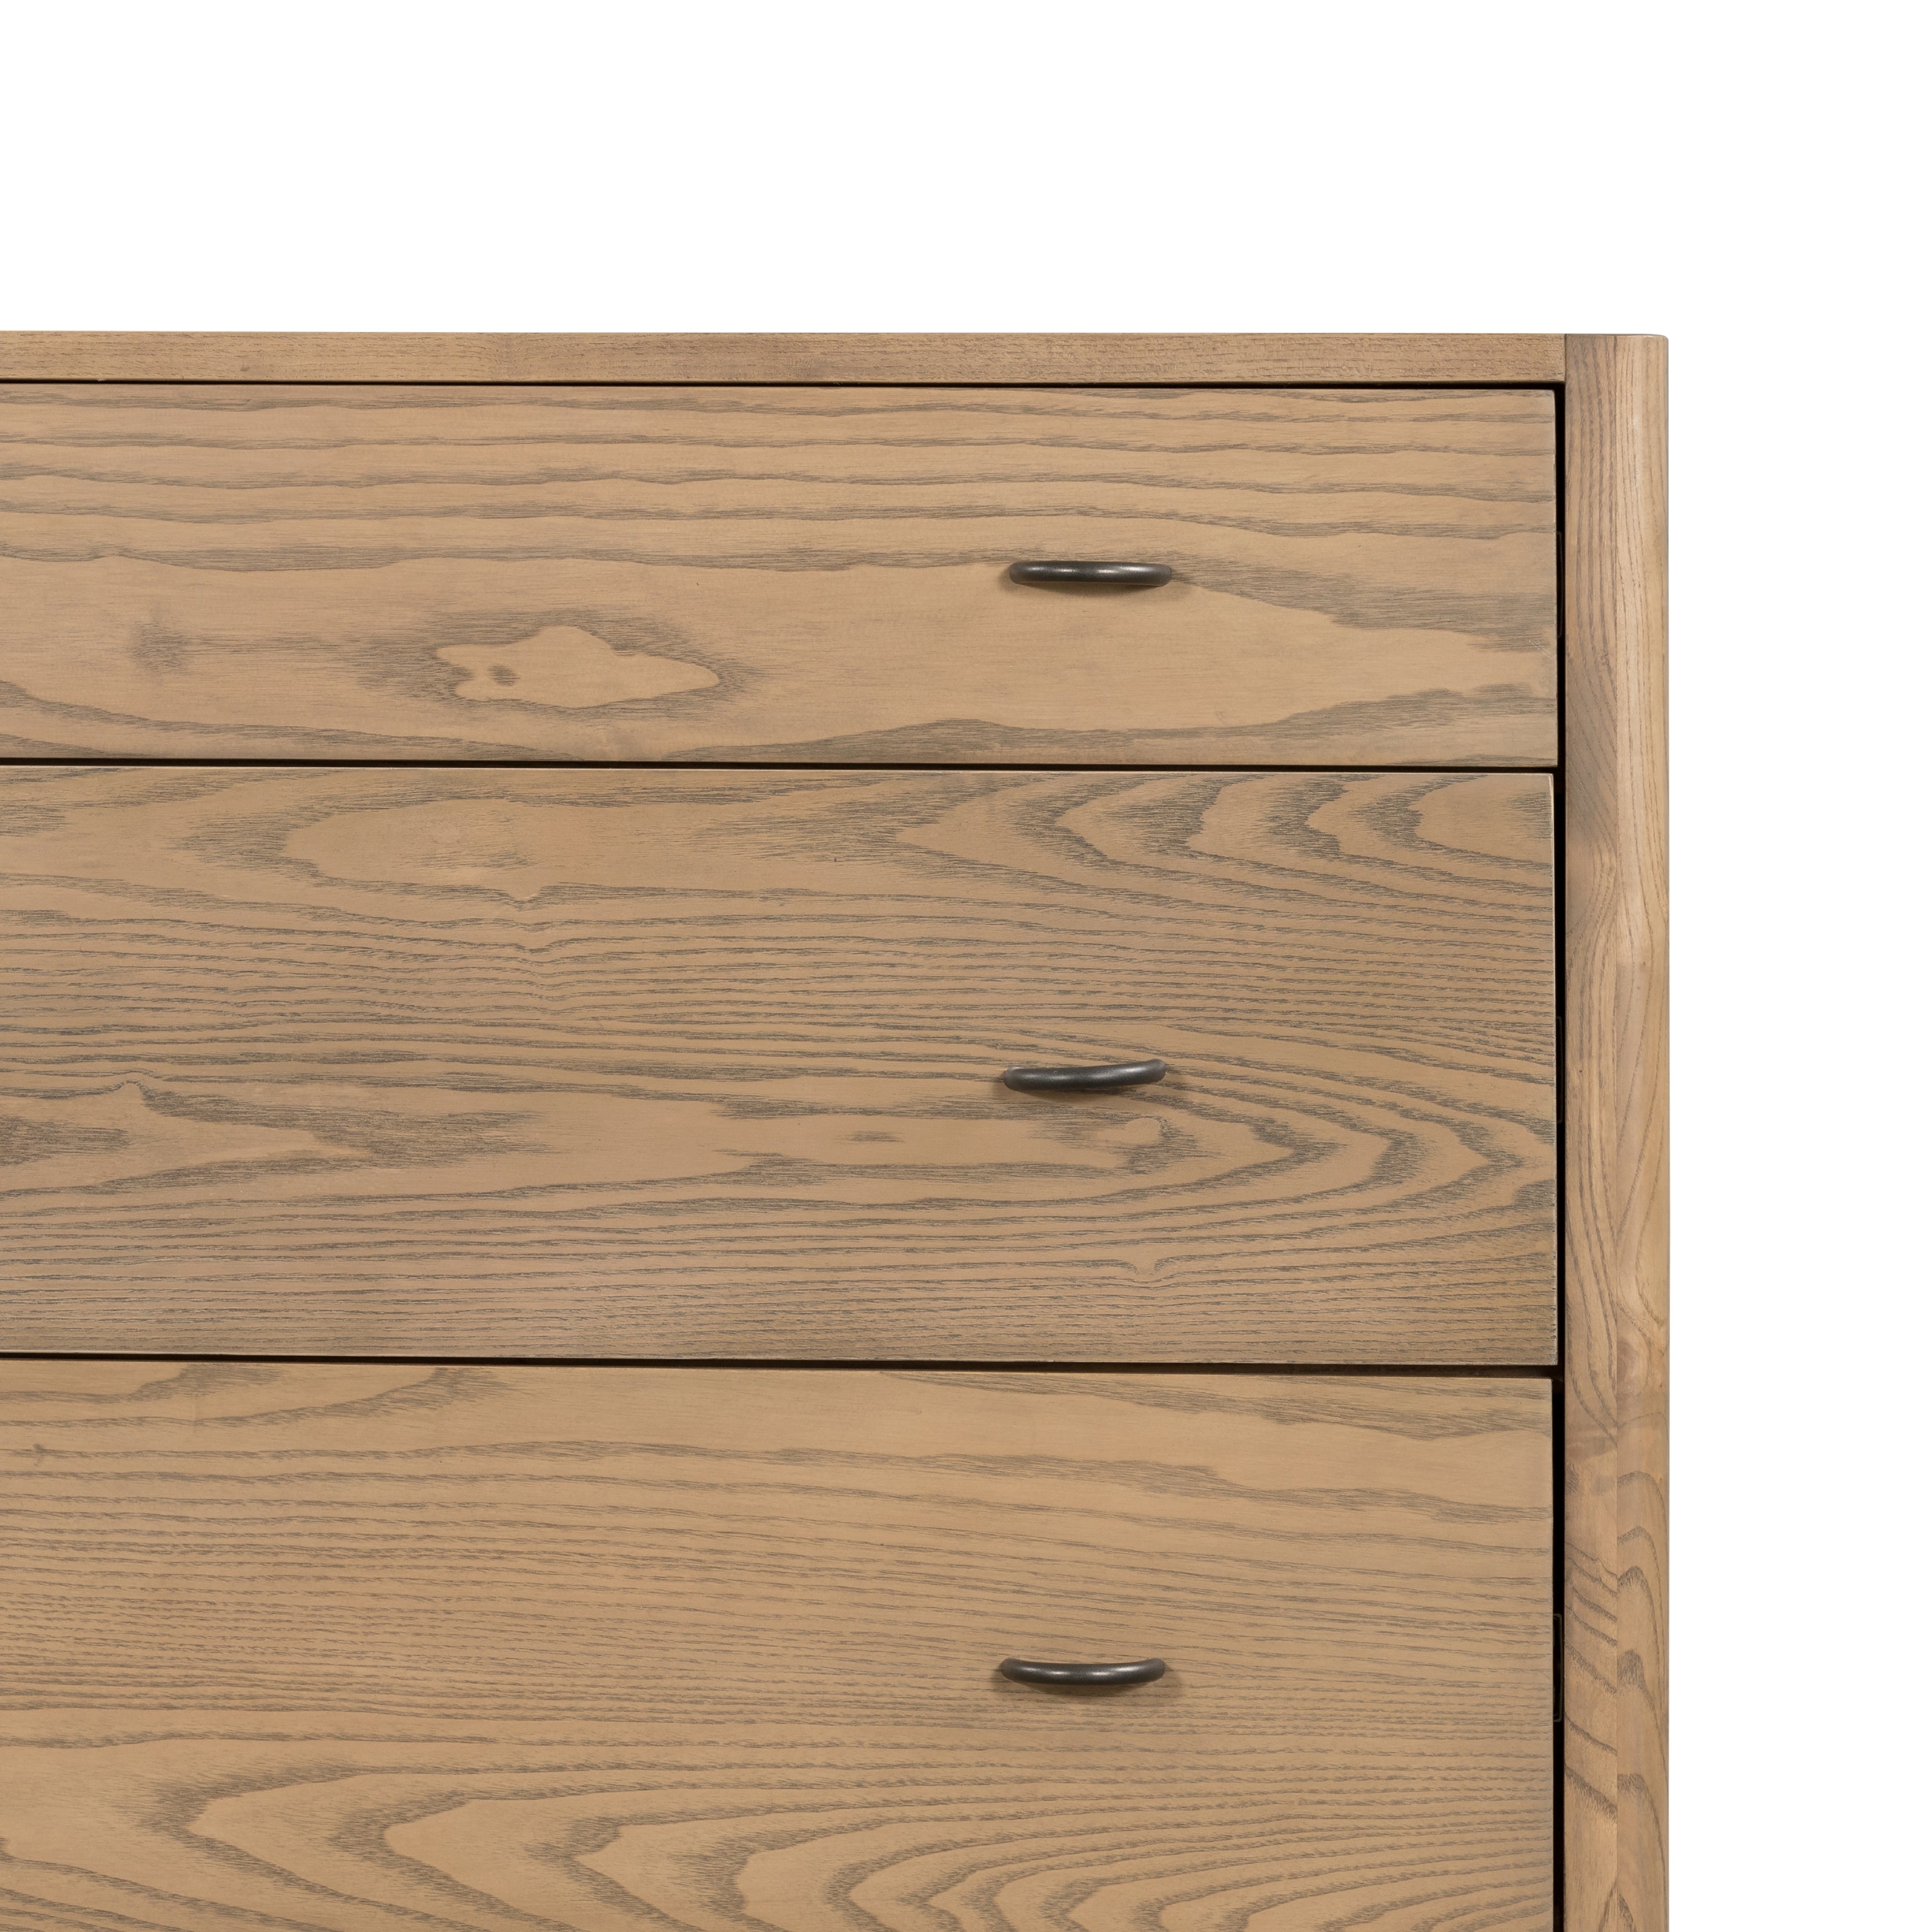 Simple yet refined, the Zuma Dune Ash 6 Drawer Dresser is a danish design-influenced dresser that is made from solid ash, with iron hardware finished in sleek gunmetal. Amethyst Home provides interior design services, furniture, rugs, and lighting in the Omaha metro area.